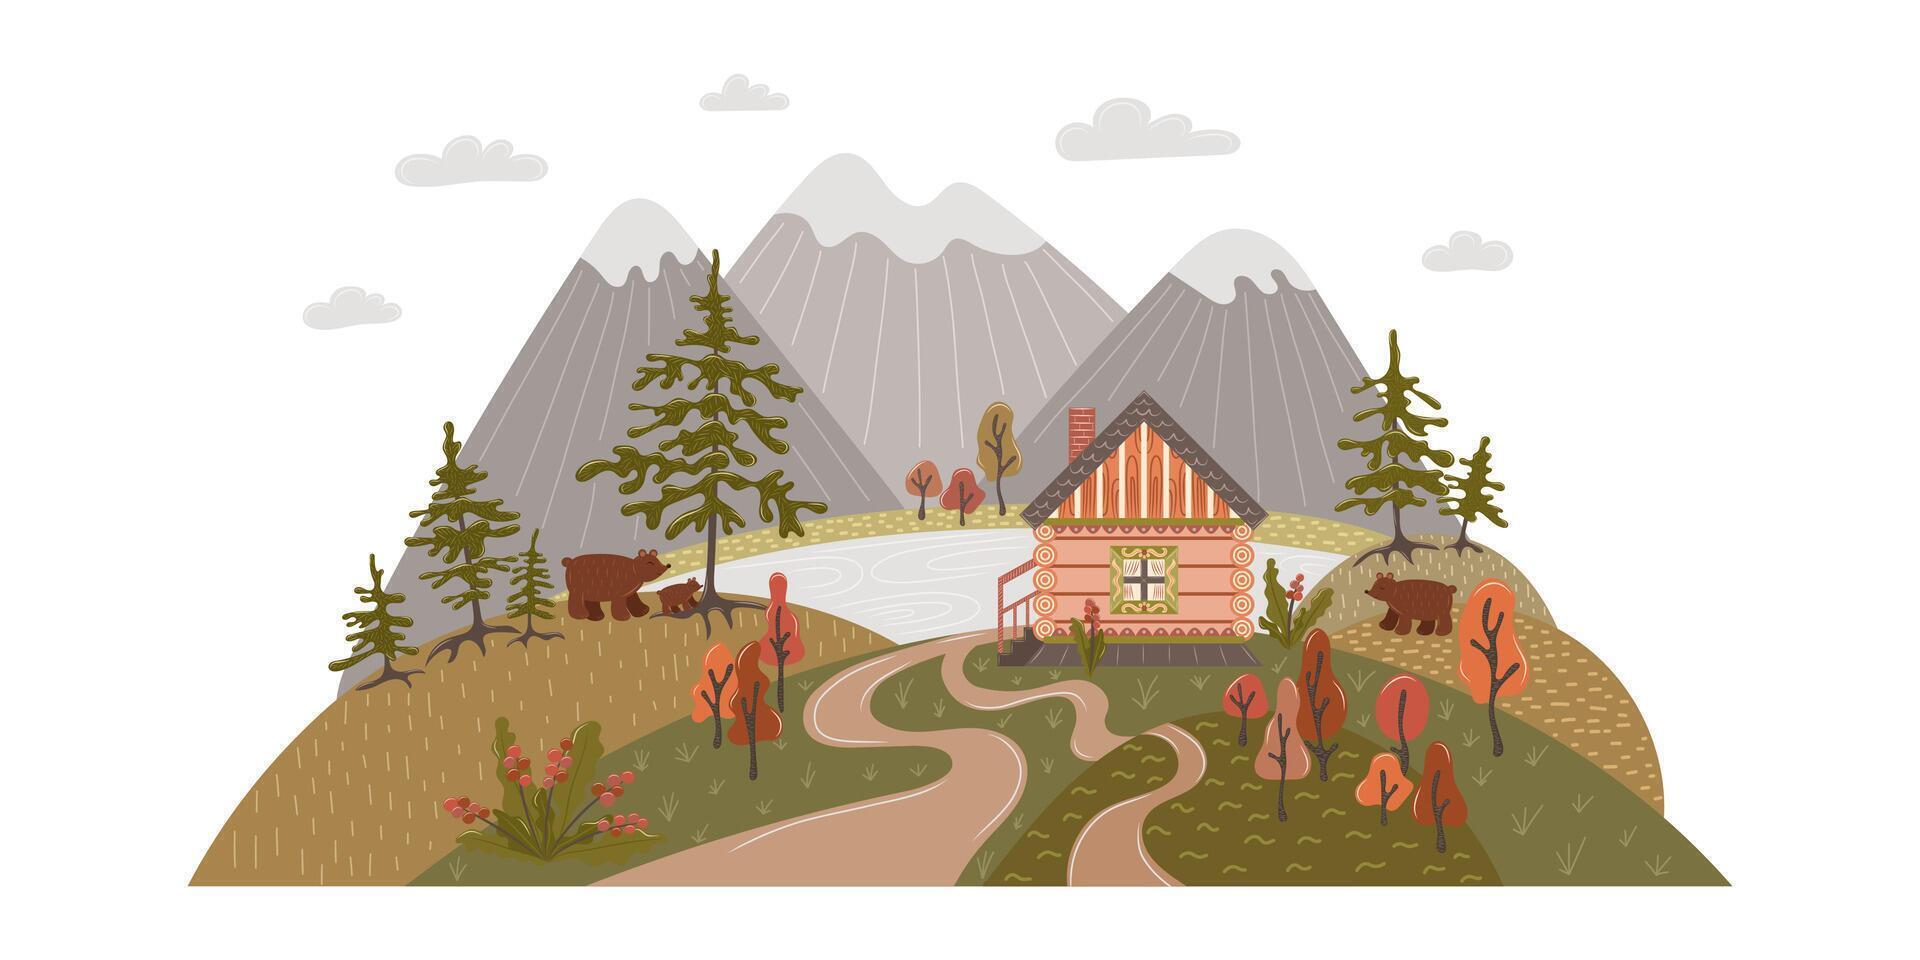 Landscape fairytale house by the lake in the mountains. Isolated vector illustration. For children, for cards, for games, for design